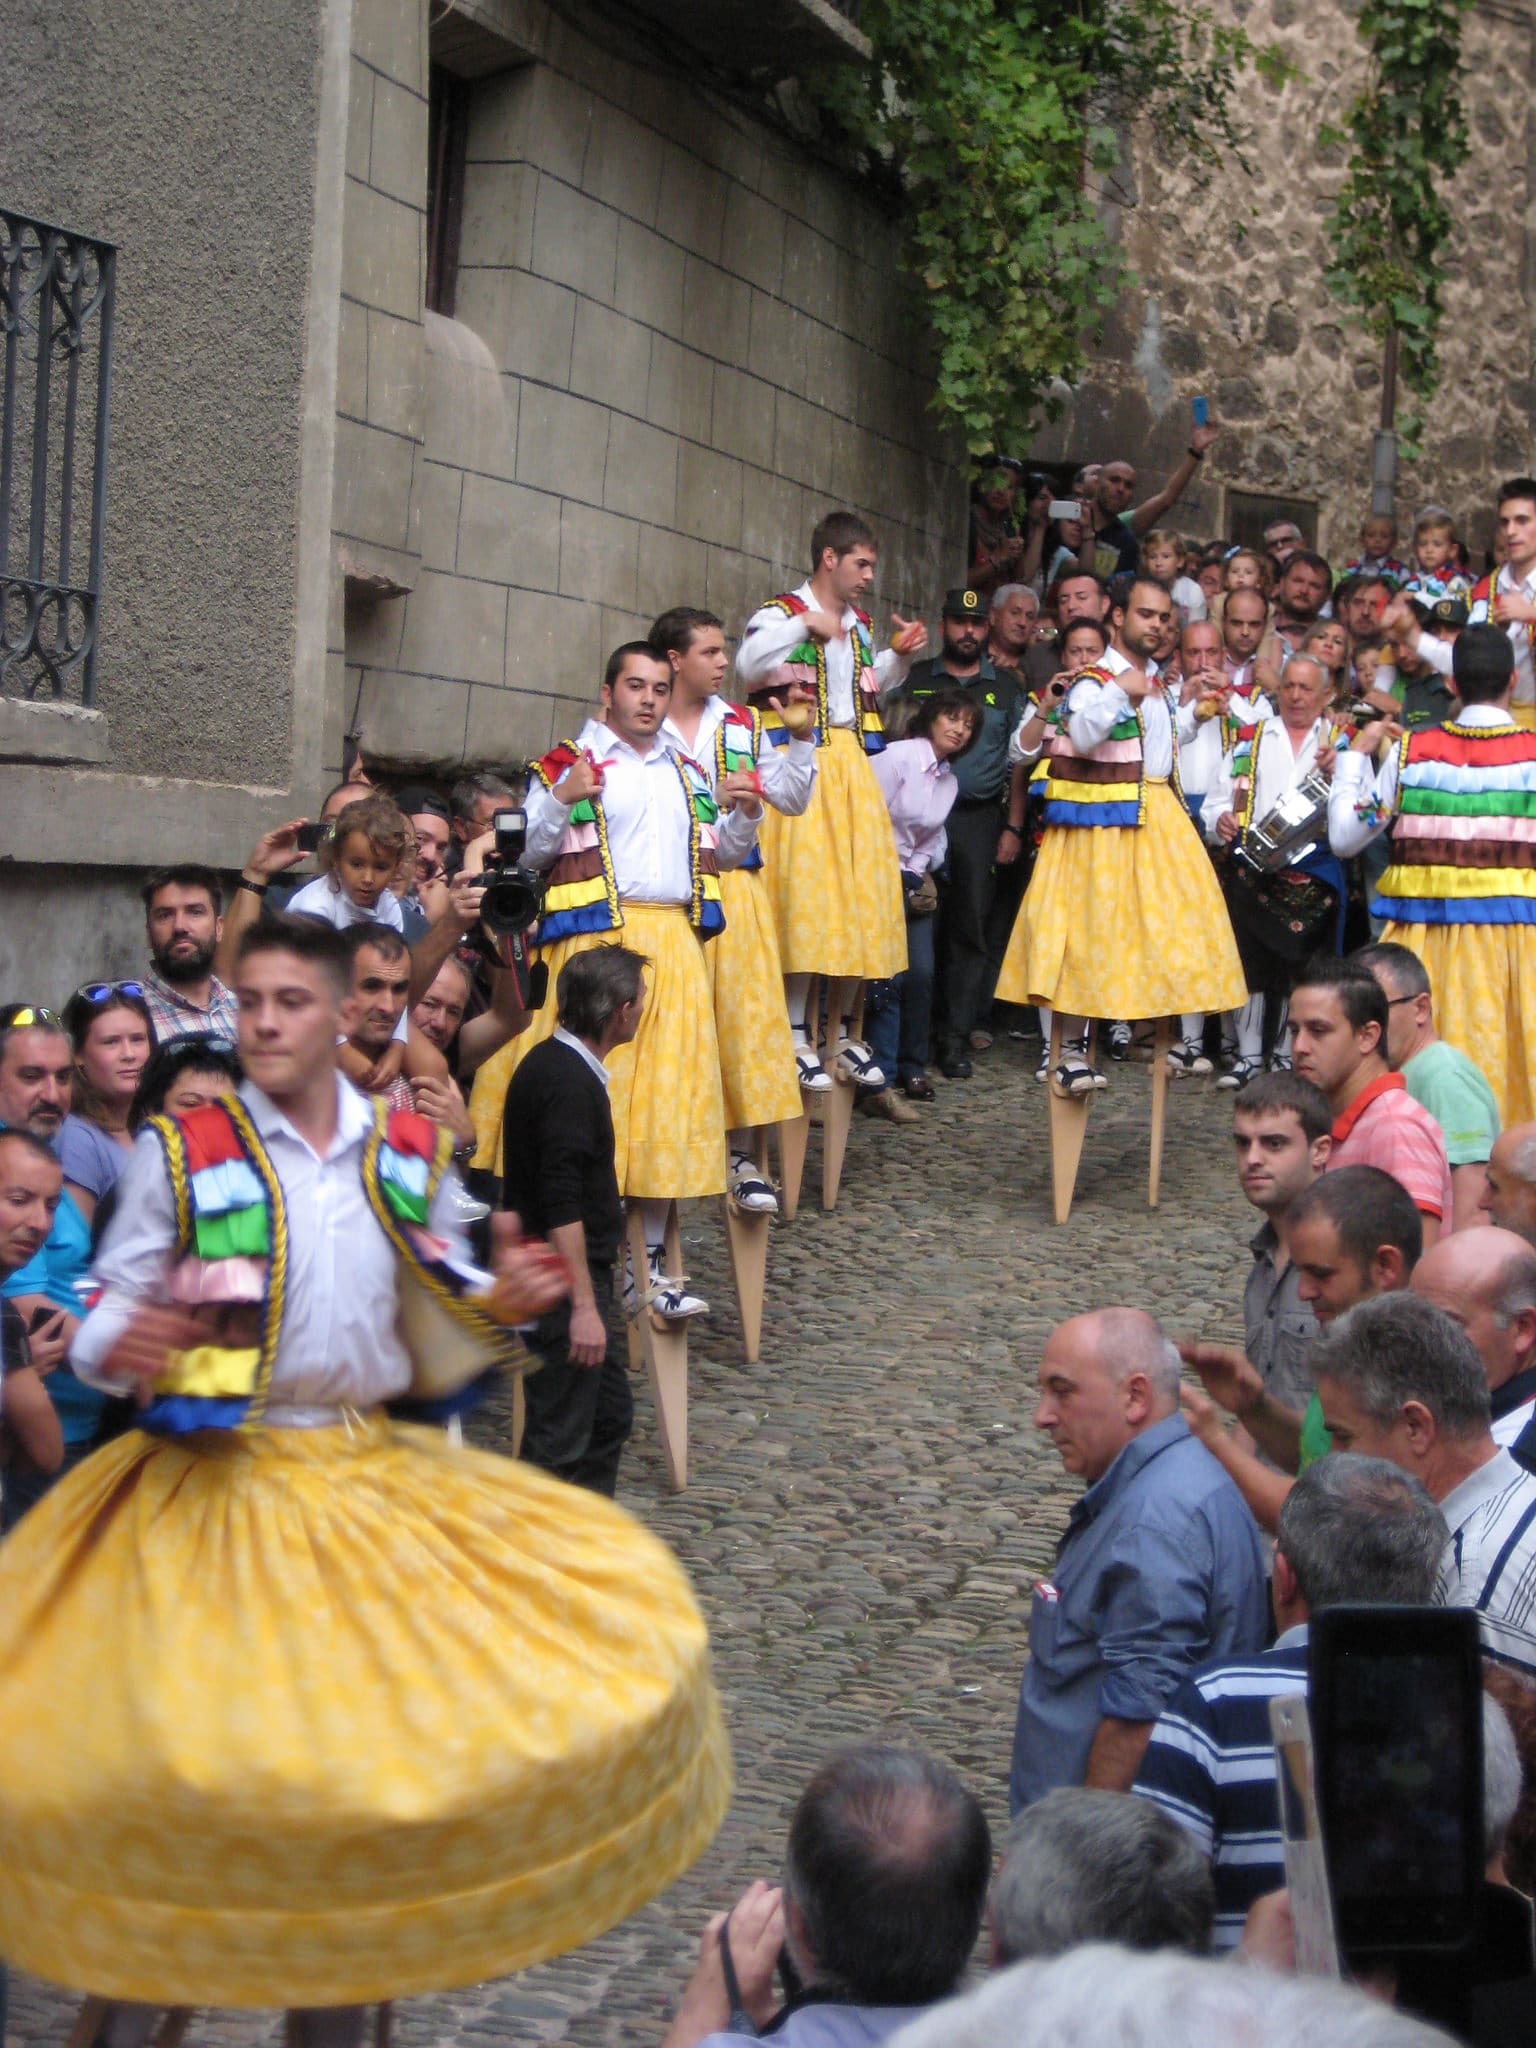 The spinning stilt dancers of Anguiano